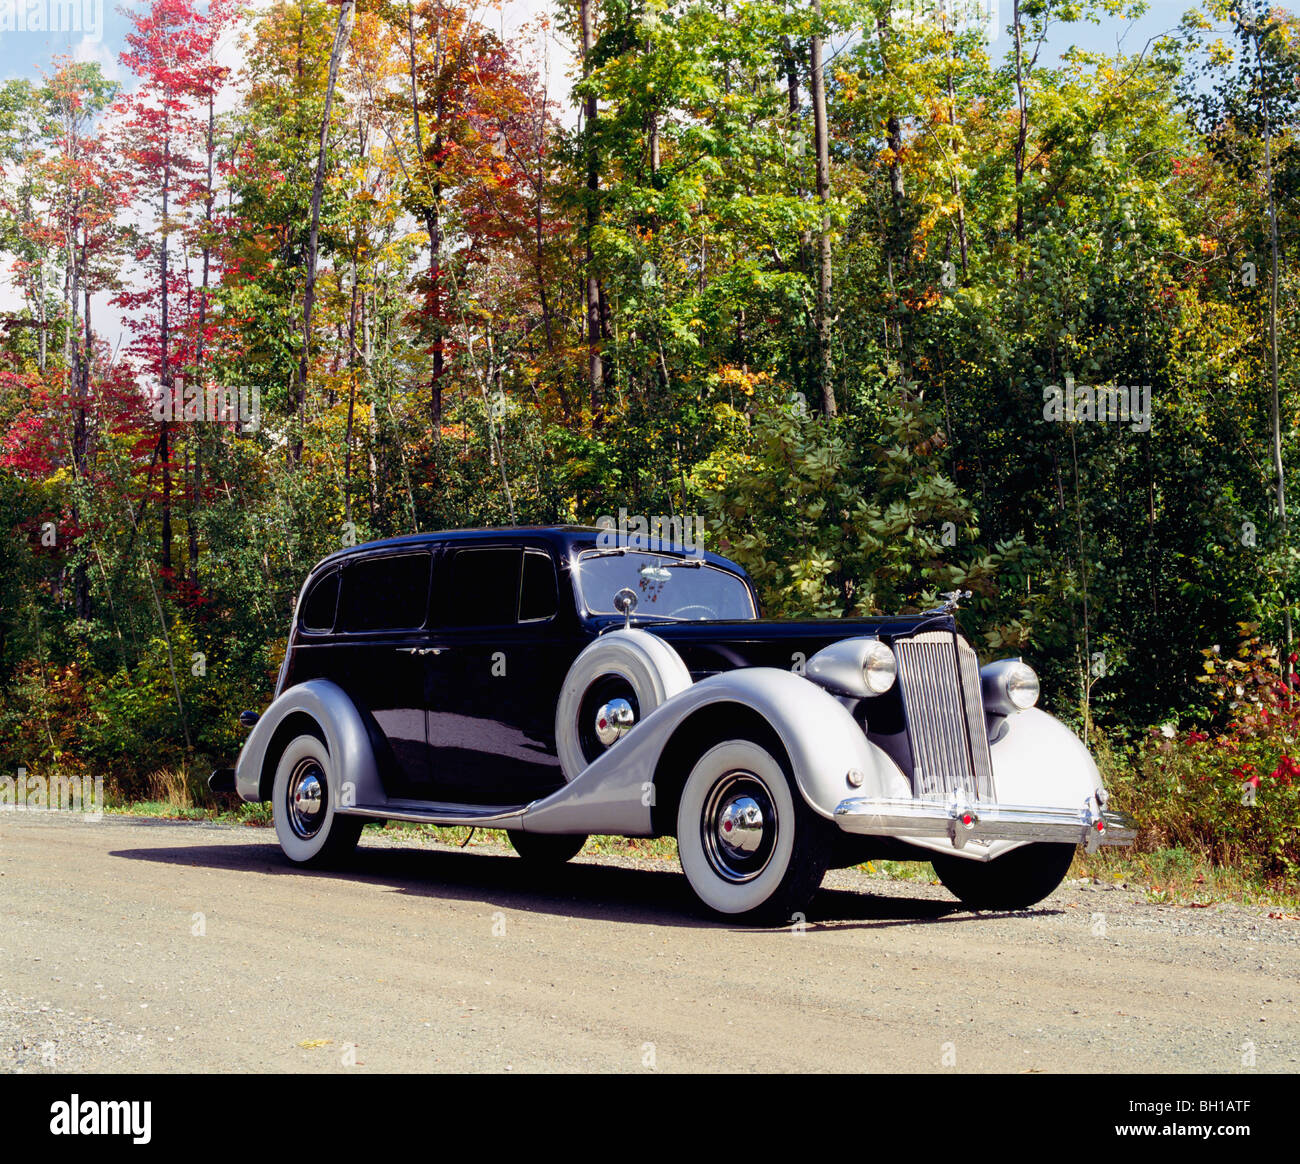 Vintage 1938 Packard Super Eight car, Waterloo, Quebec, Canada Stock Photo